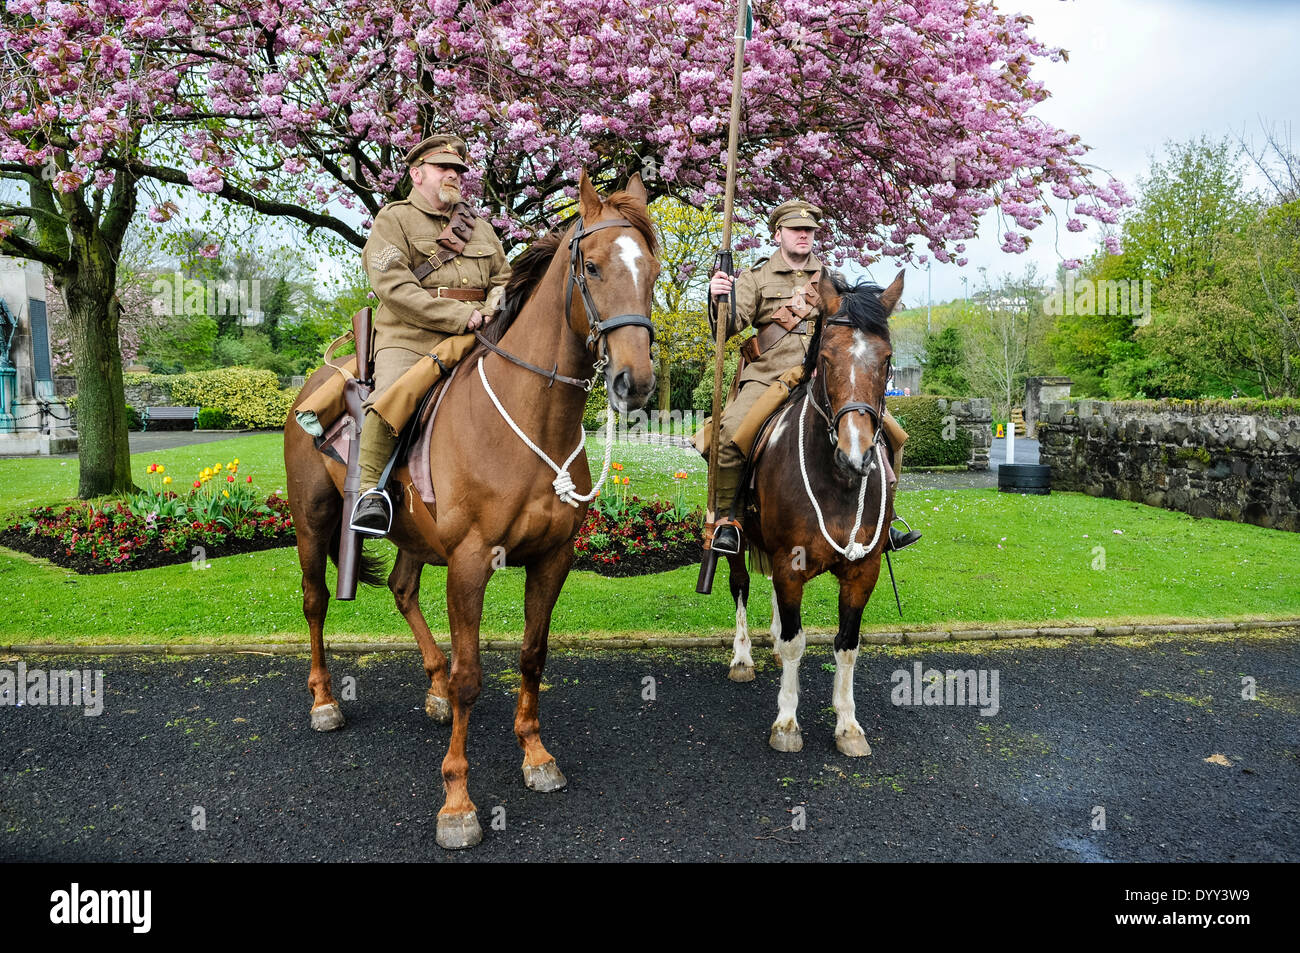 Two men dressed as WW1 soldiers from the Ulster Volunteers (UVF) riding horses. Stock Photo